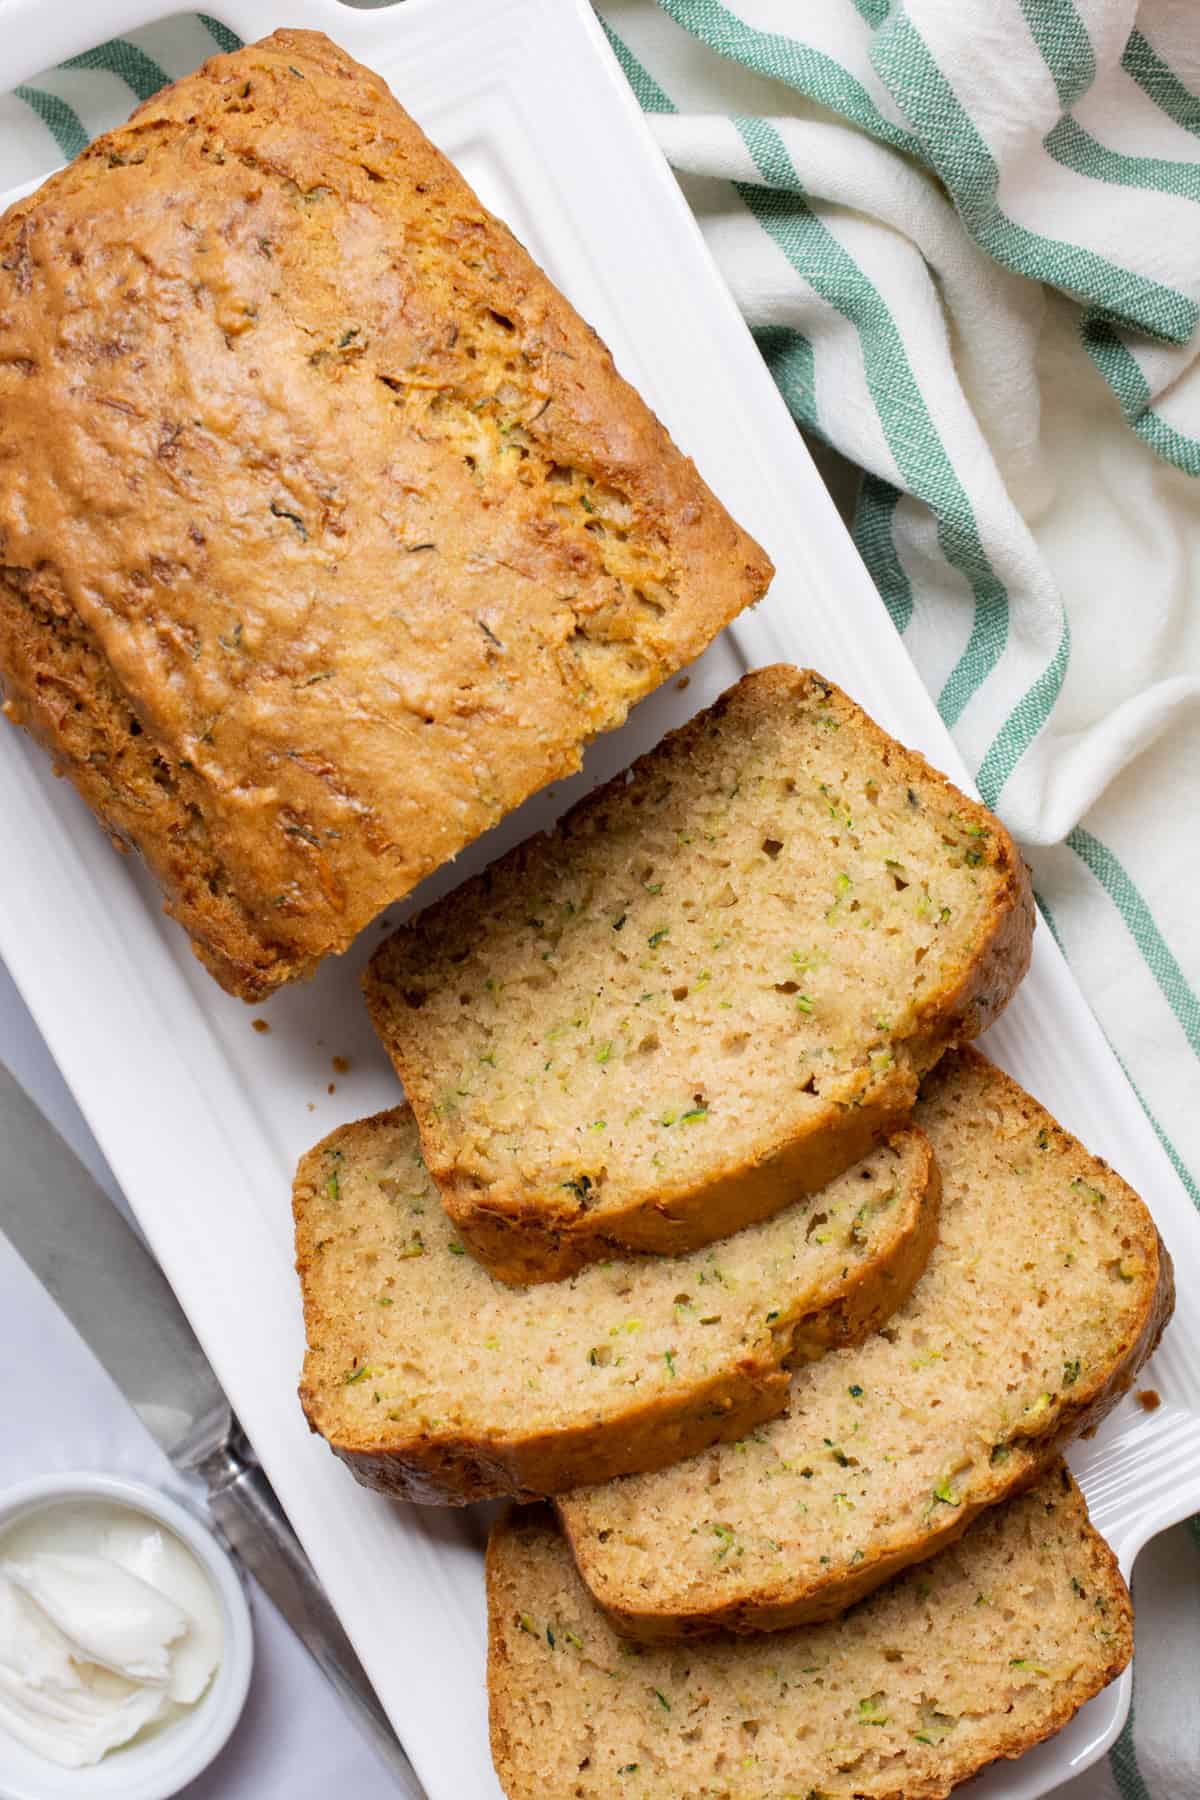 A loaf of vegan zucchini bread with 4 slices cut.